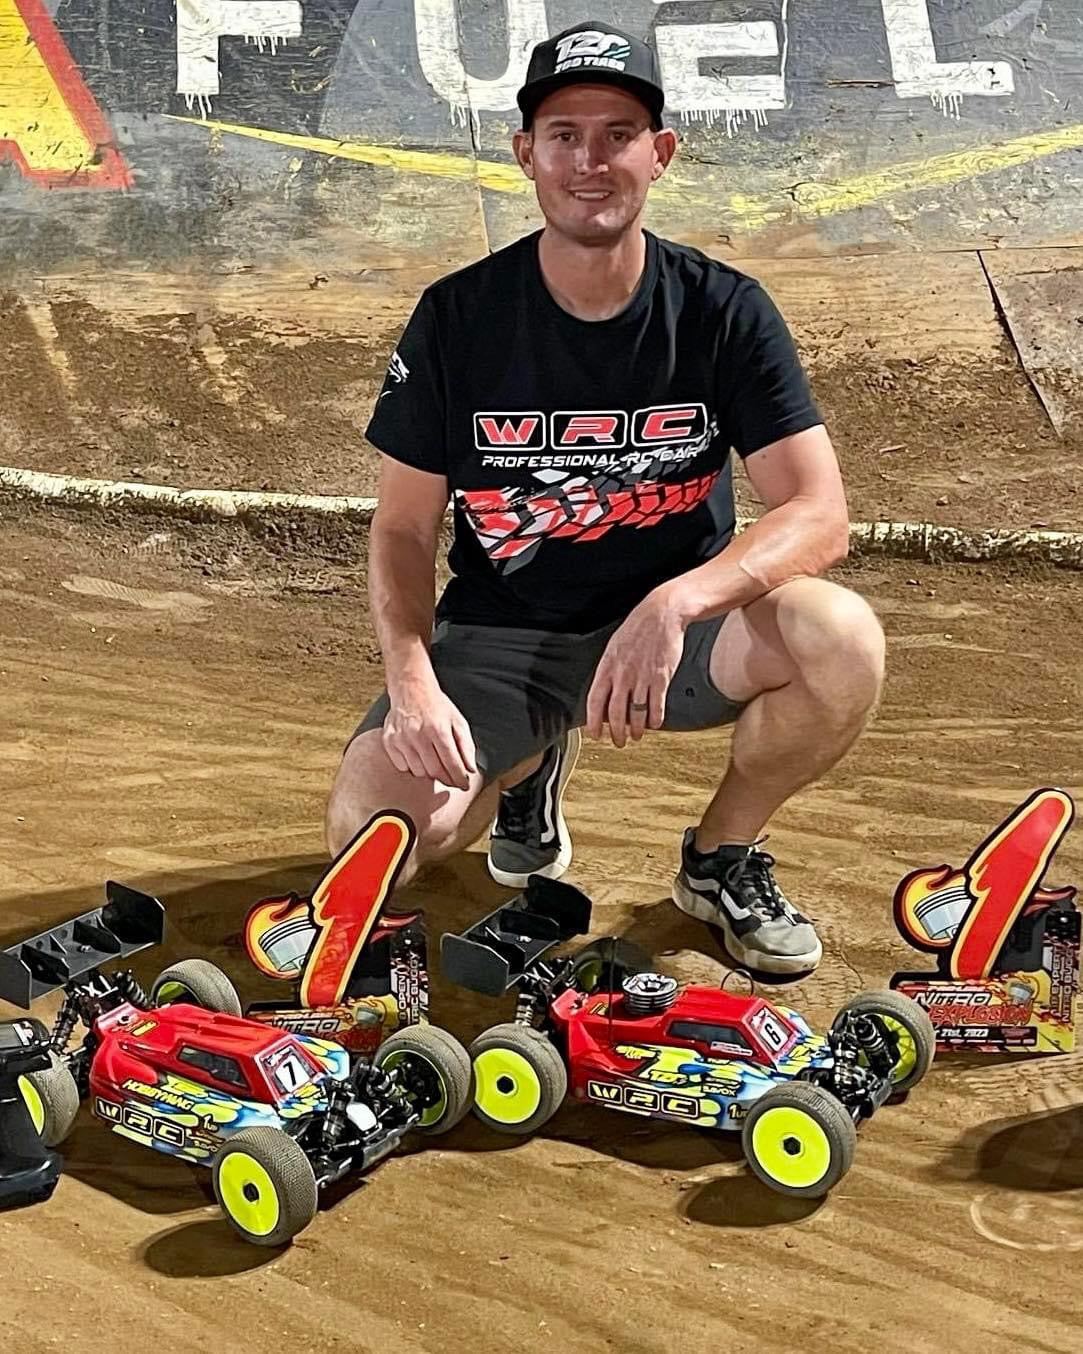 Congratulations to Ryan Cavalieri for Taking the Win at The Nitro Explosion